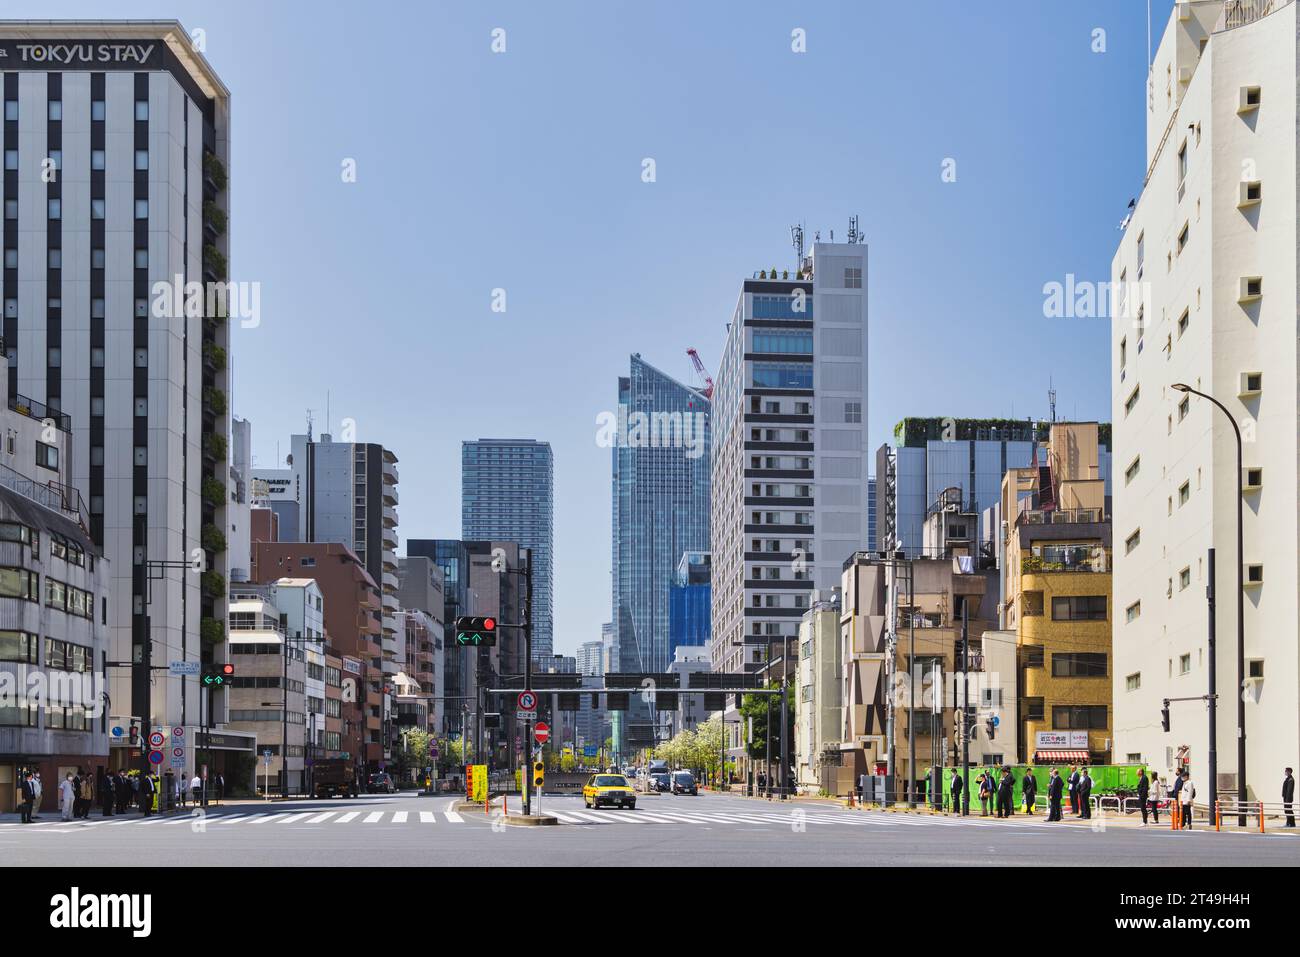 Tokyo, Japan - April 10, 2023: City view with a street in the Minato district. Minato is a special ward in the Tokyo Metropolis merged 1947 of Akasaka Stock Photo